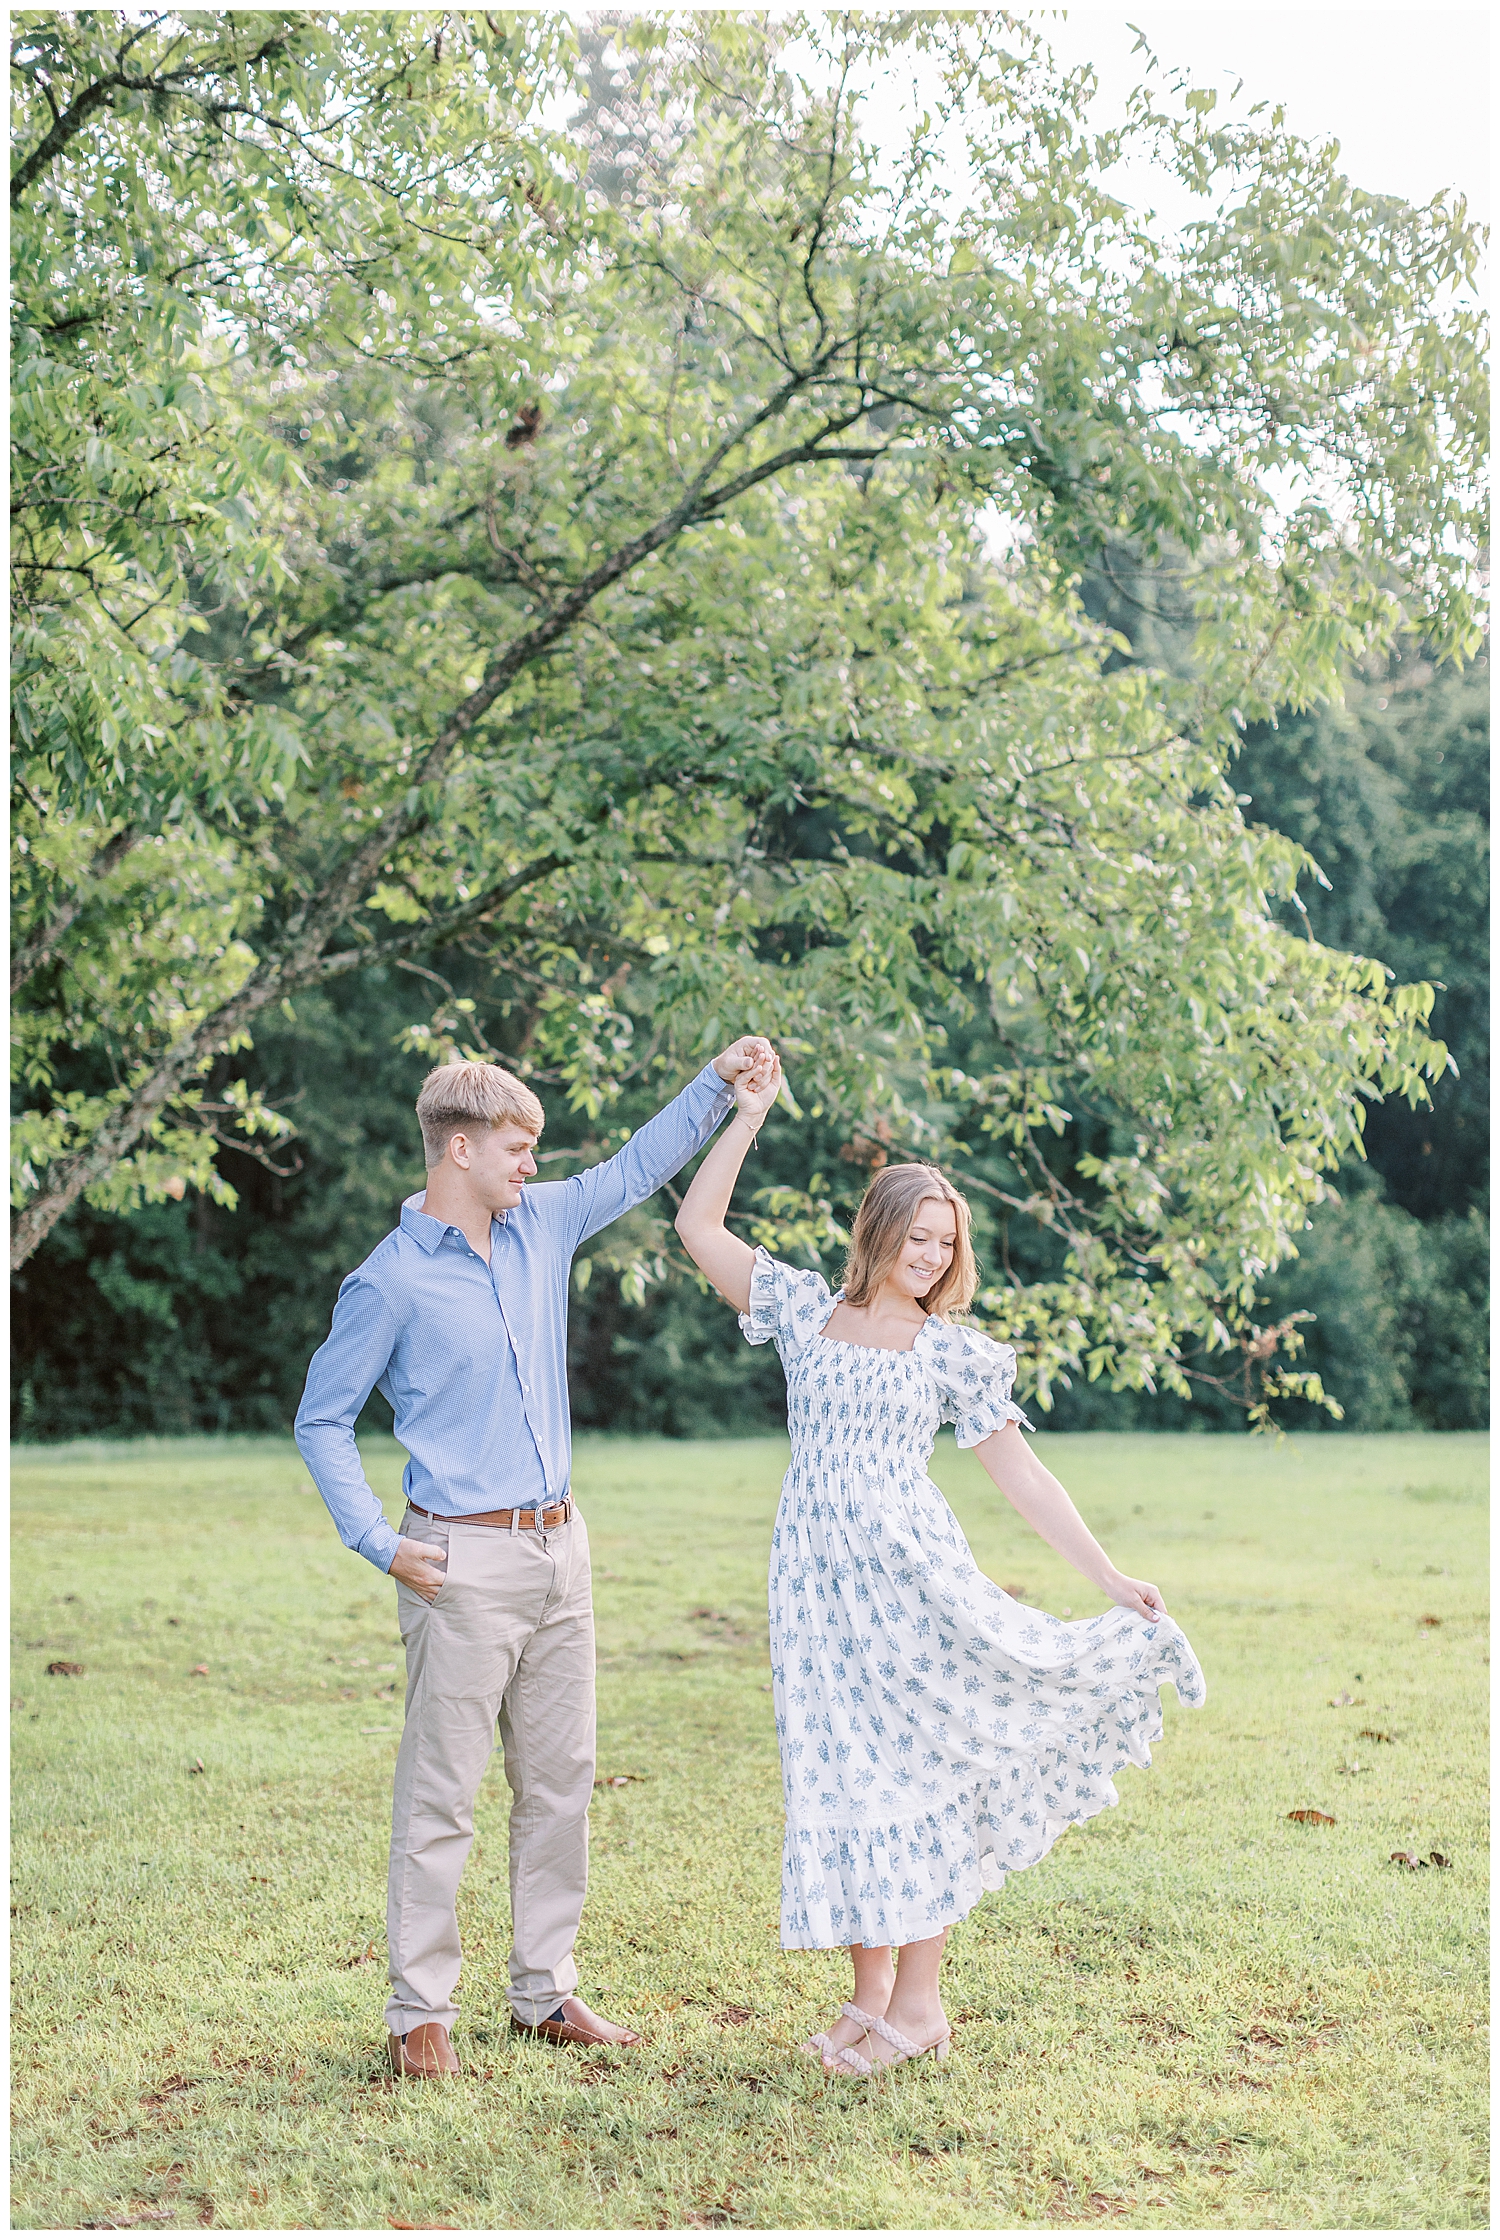 A couple dances together in the sunrise engagement photos.